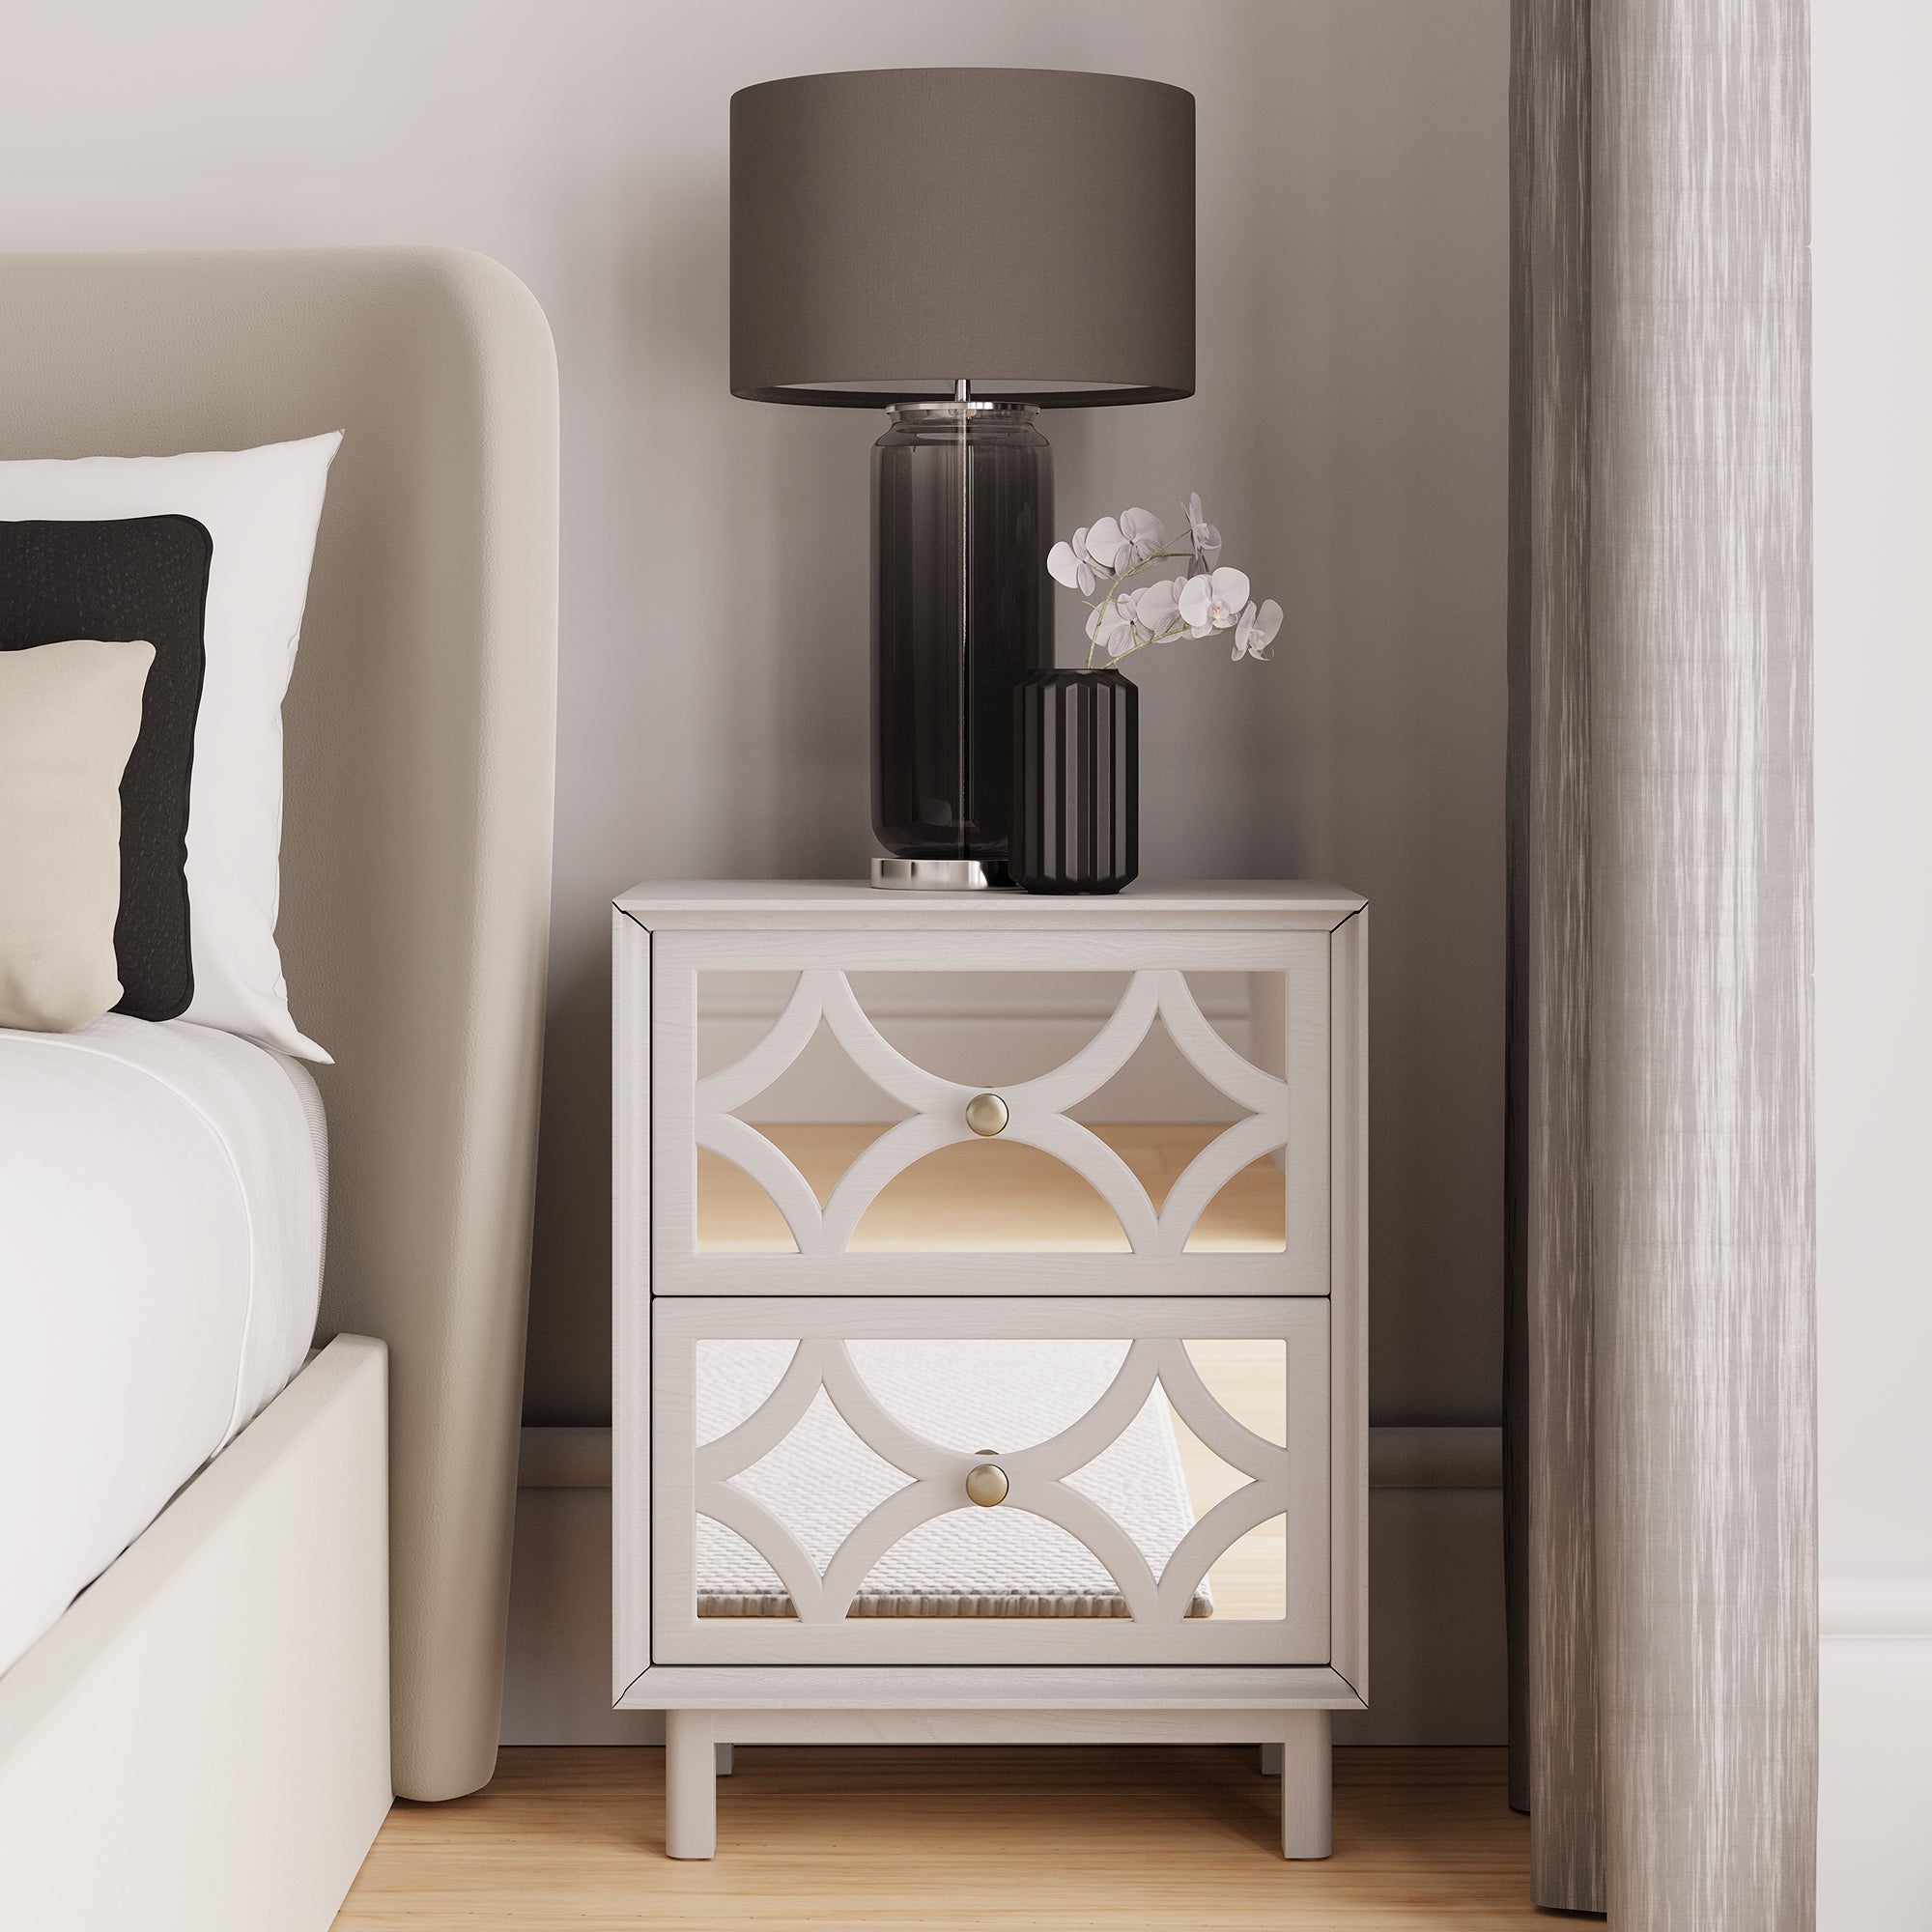 Delphi 2 Drawer Bedside Table, Mirrored Grey